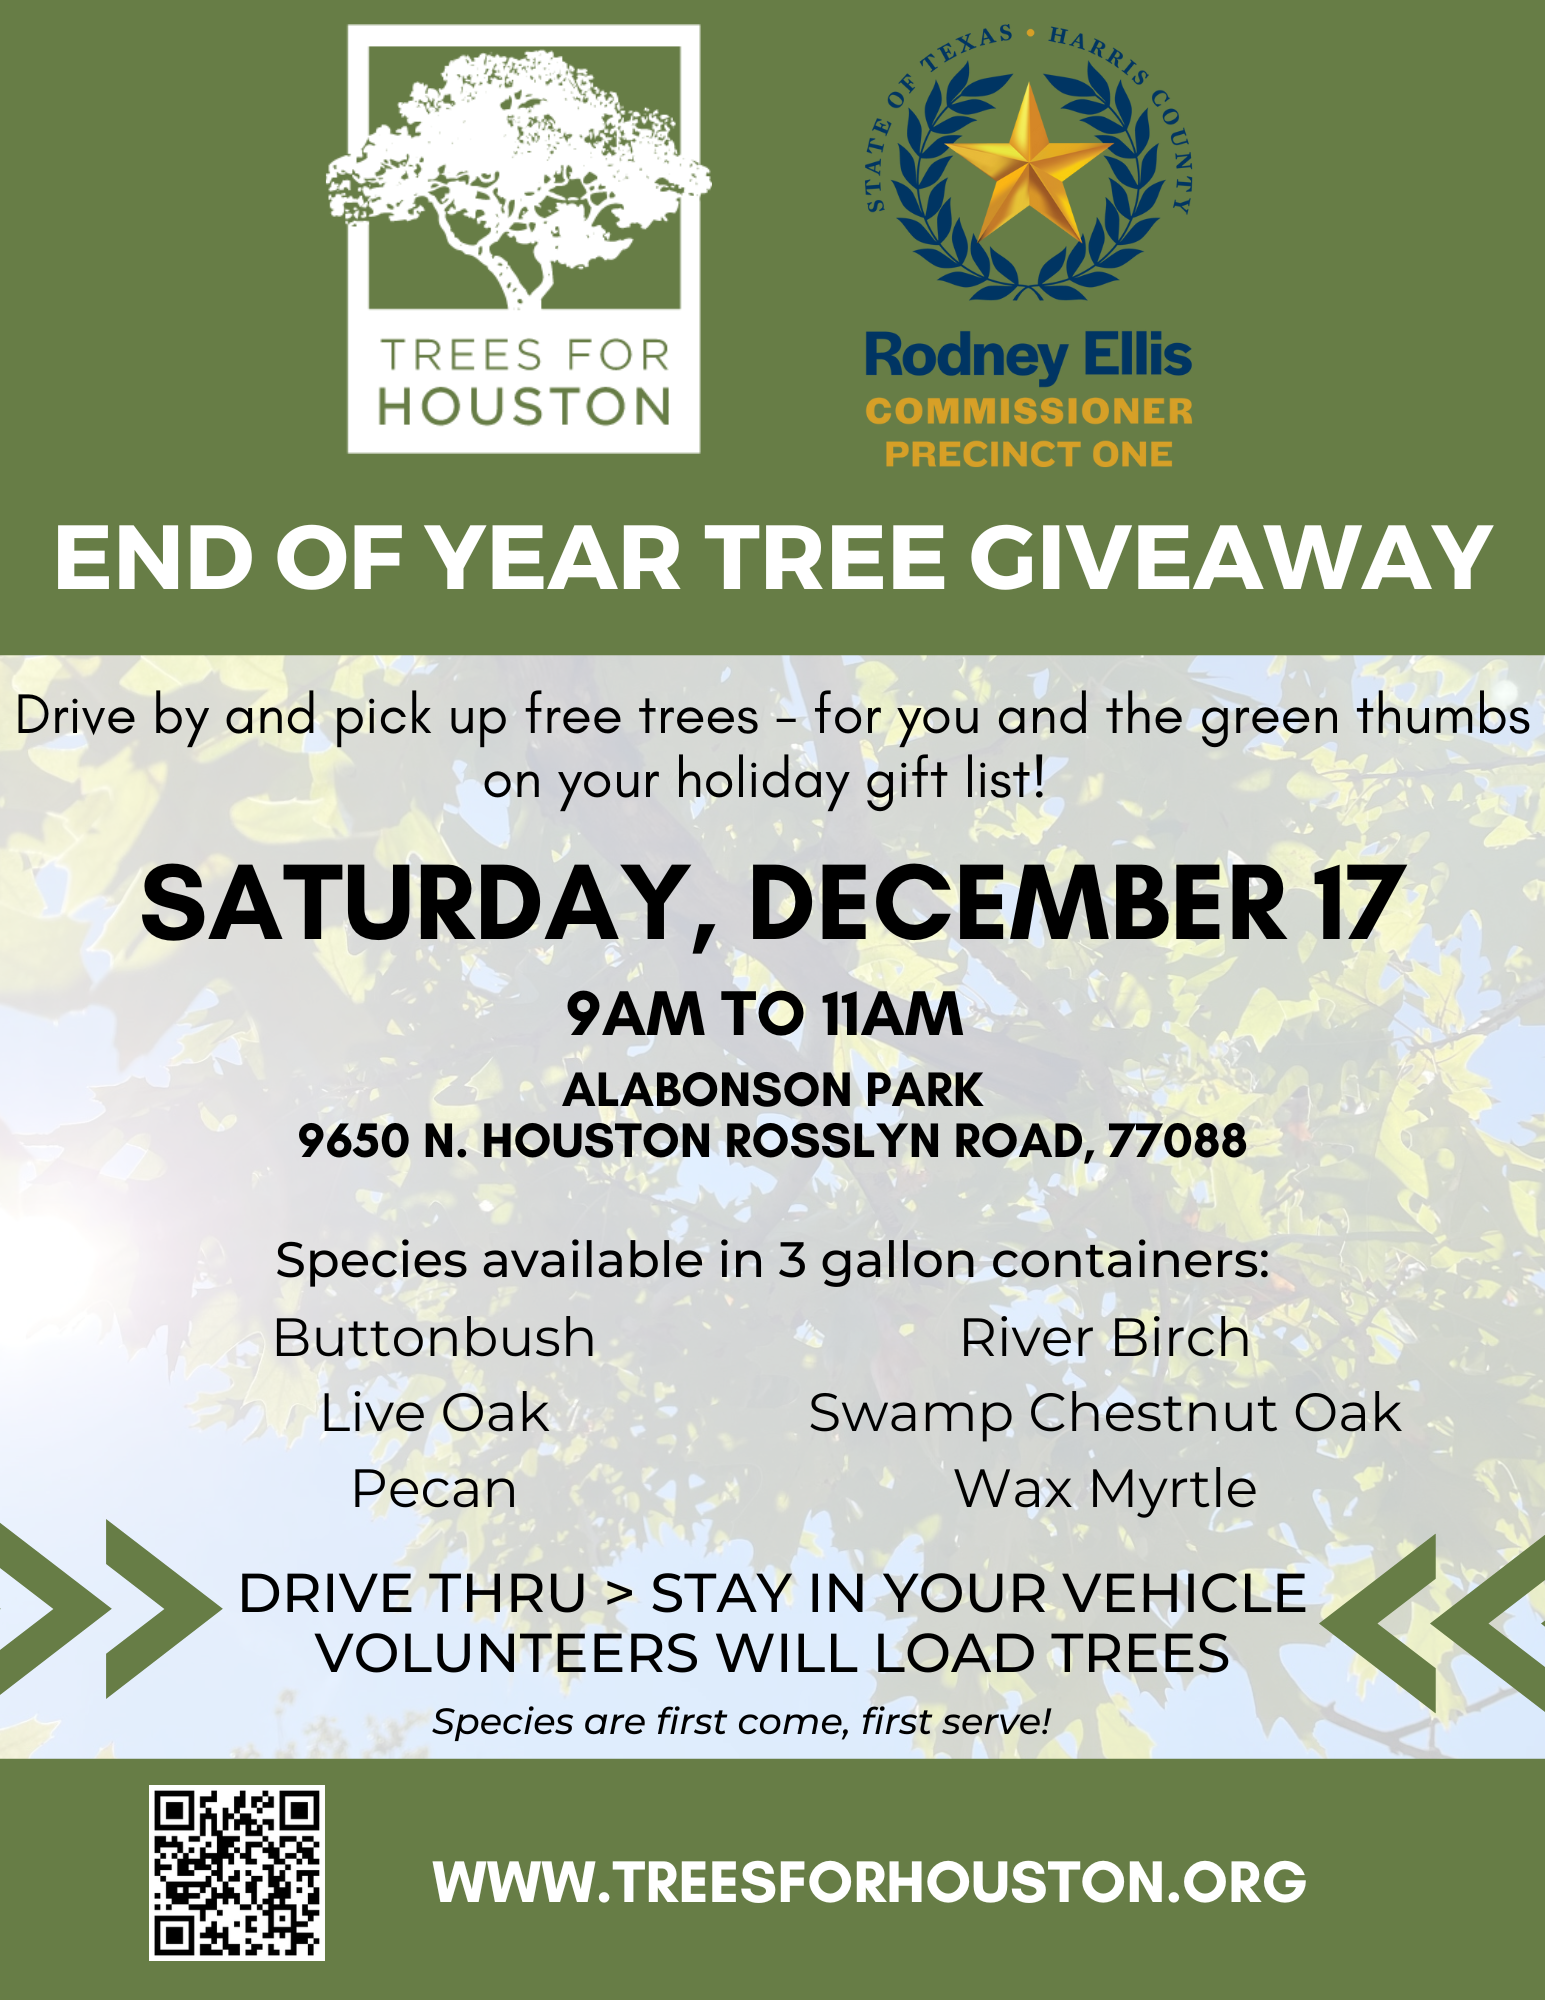 Trees For Houston Tree Giveaway in Partnership with Harris County